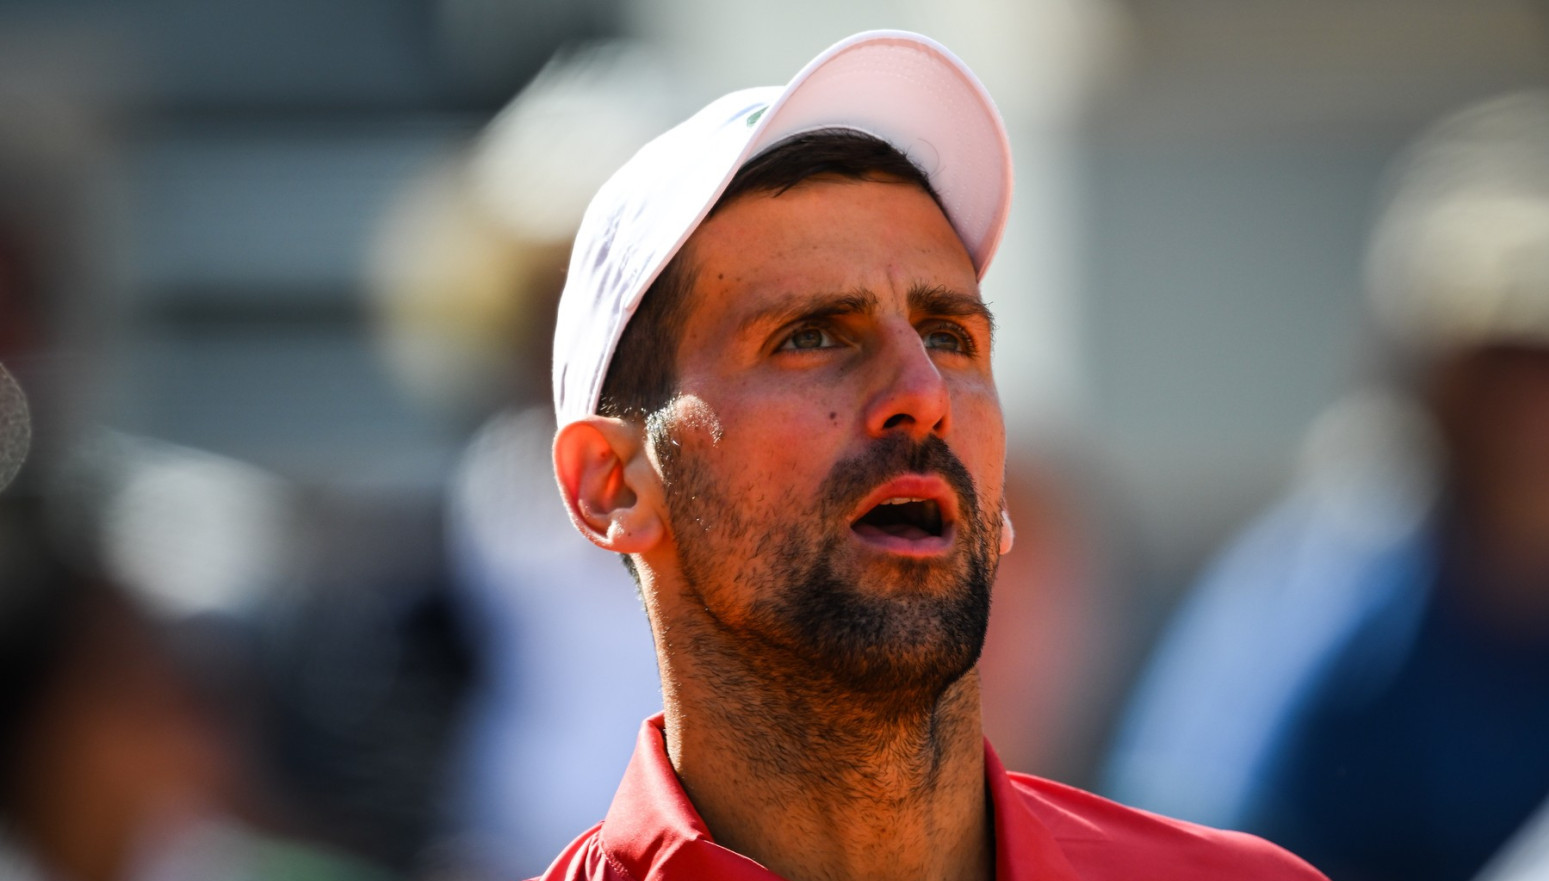 Due to a “medial meniscus tear”, Novak could miss Wimbledon and the Olympic Games!